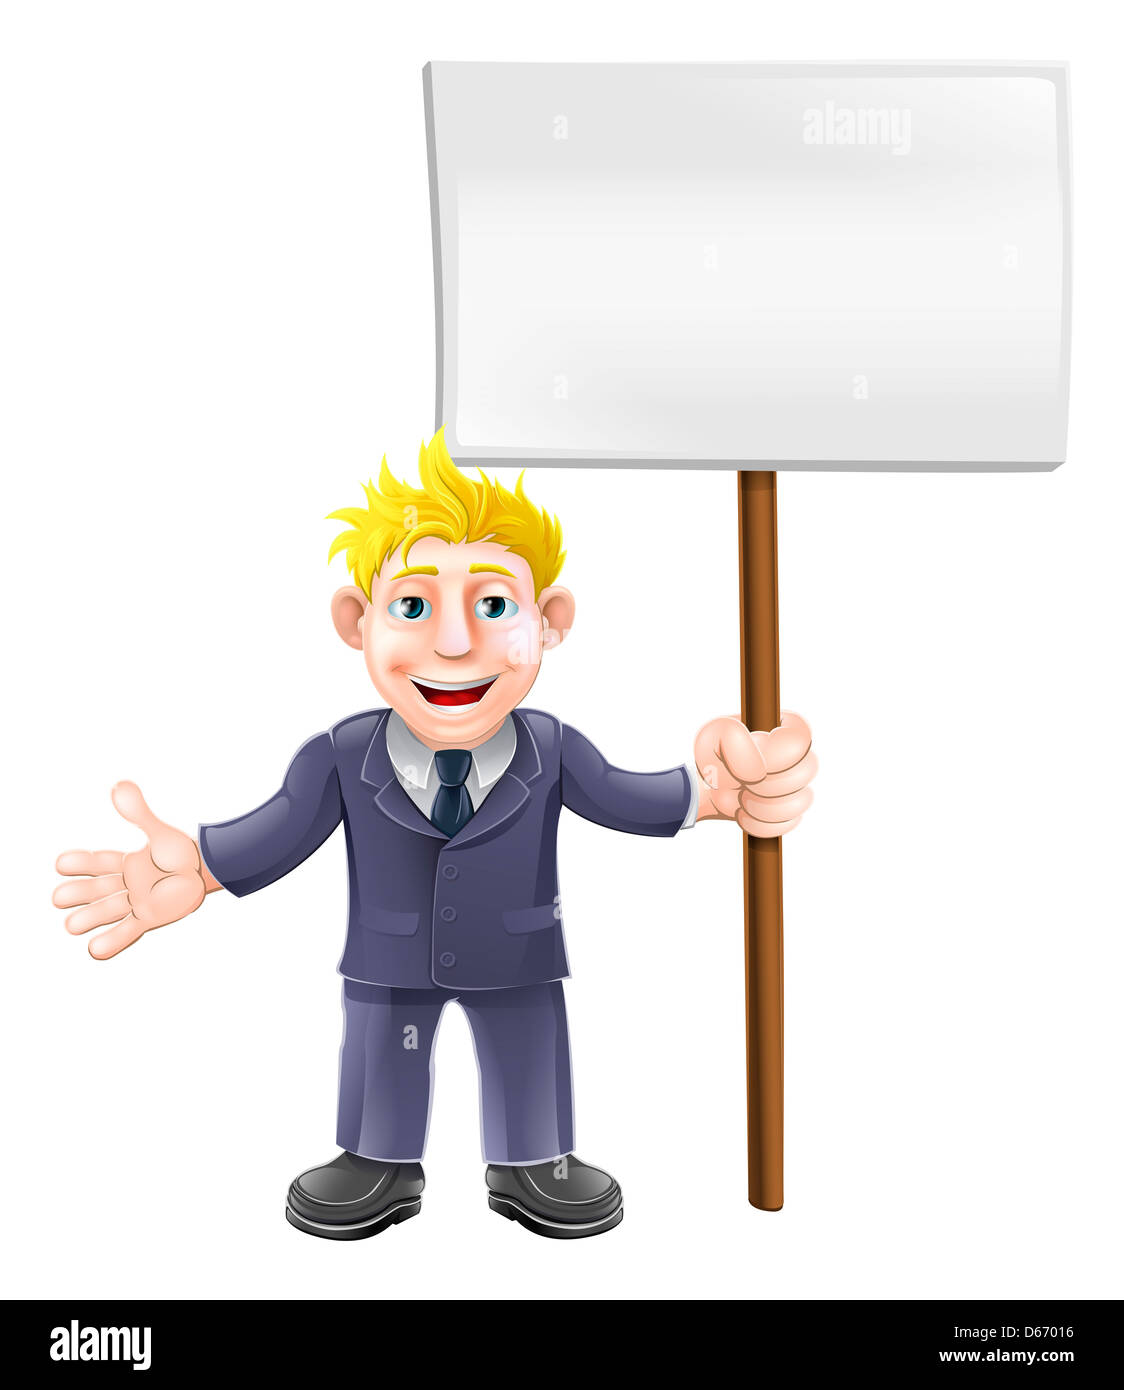 A cartoon illustration of a business guy in a suit holding a sign board Stock Photo